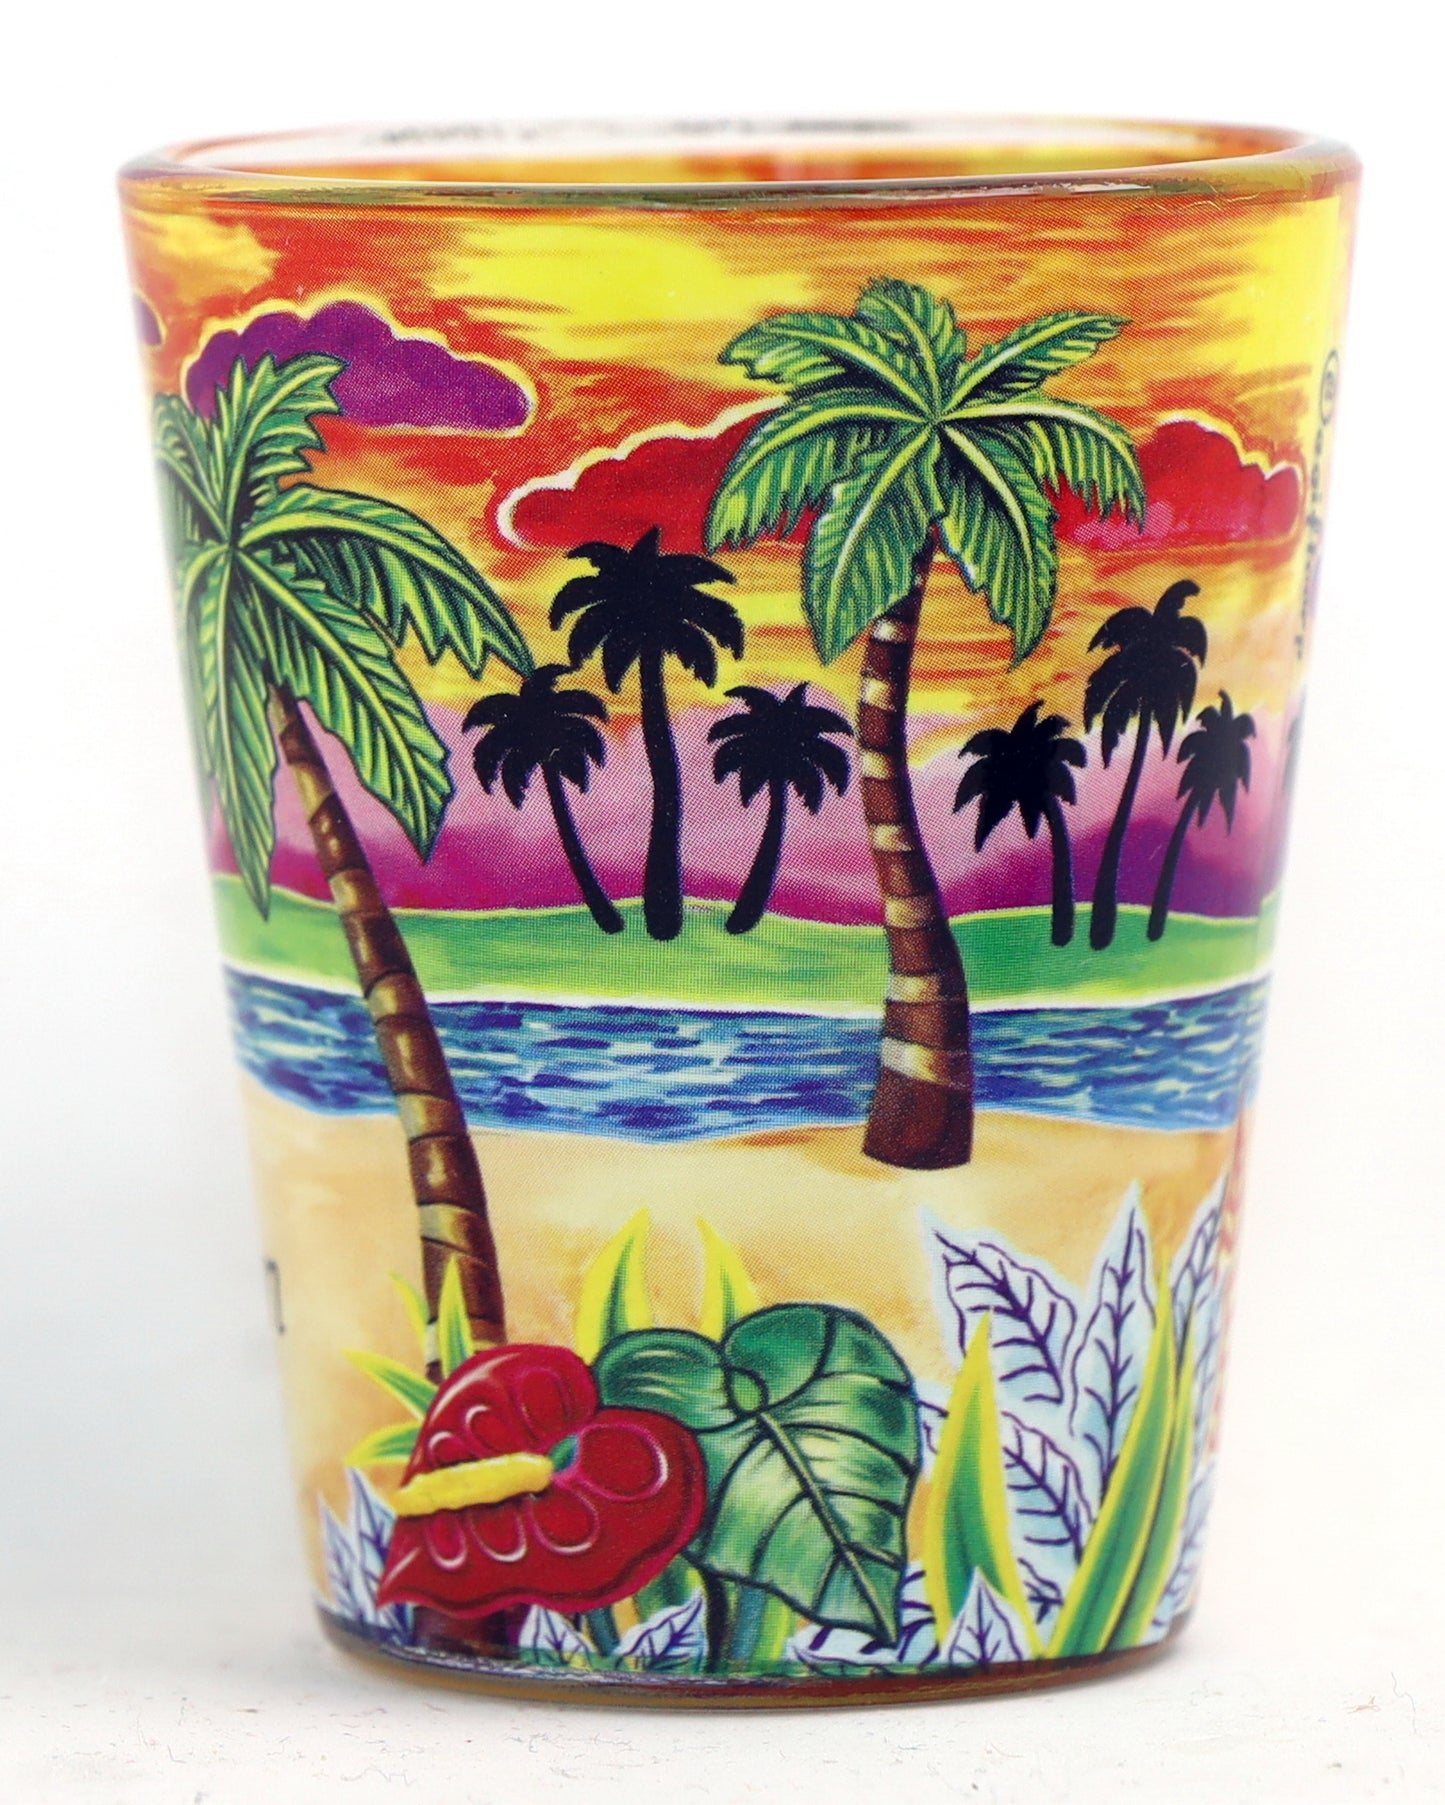 San Juan Puerto Rico Yellow Palms In-and-Out Shot Glass